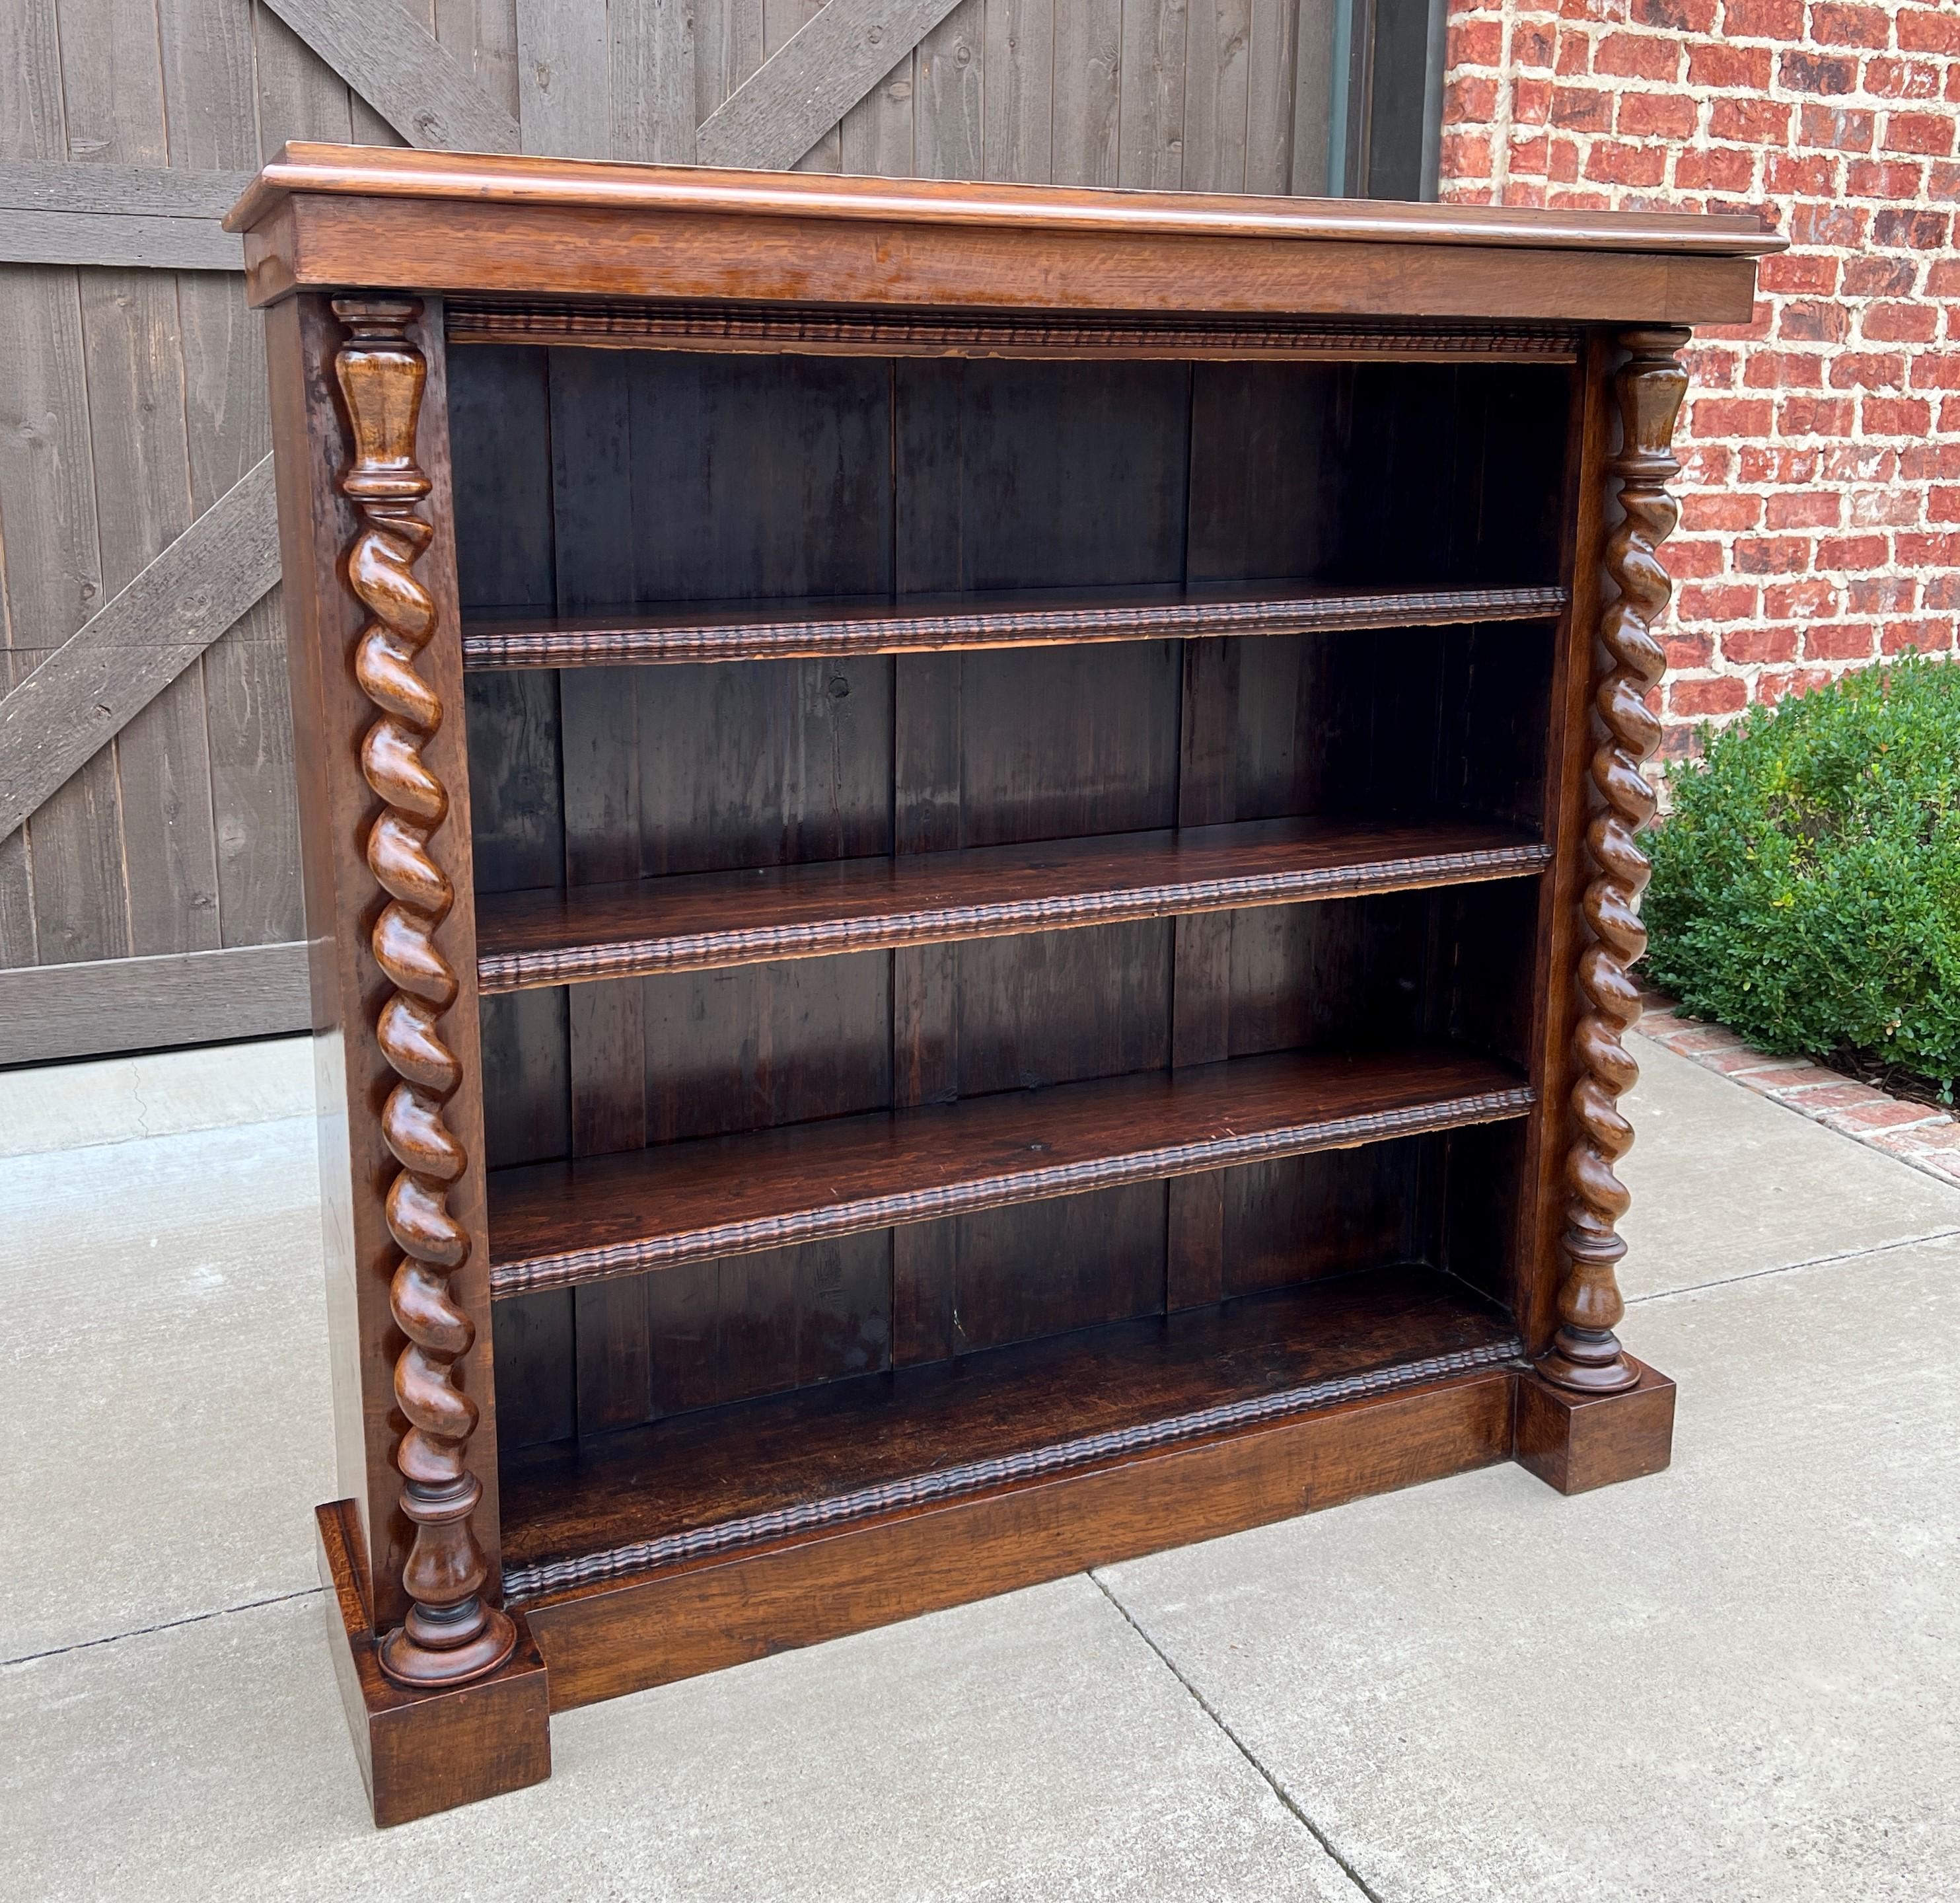 Beautiful antique English oak barley twist bookcase or display shelf/cabinet ~~c. 1920s.

Perfect for displaying your favorite antique books or collectibles~~top surface above shelves is flat for additional display.

Barley twist posts with